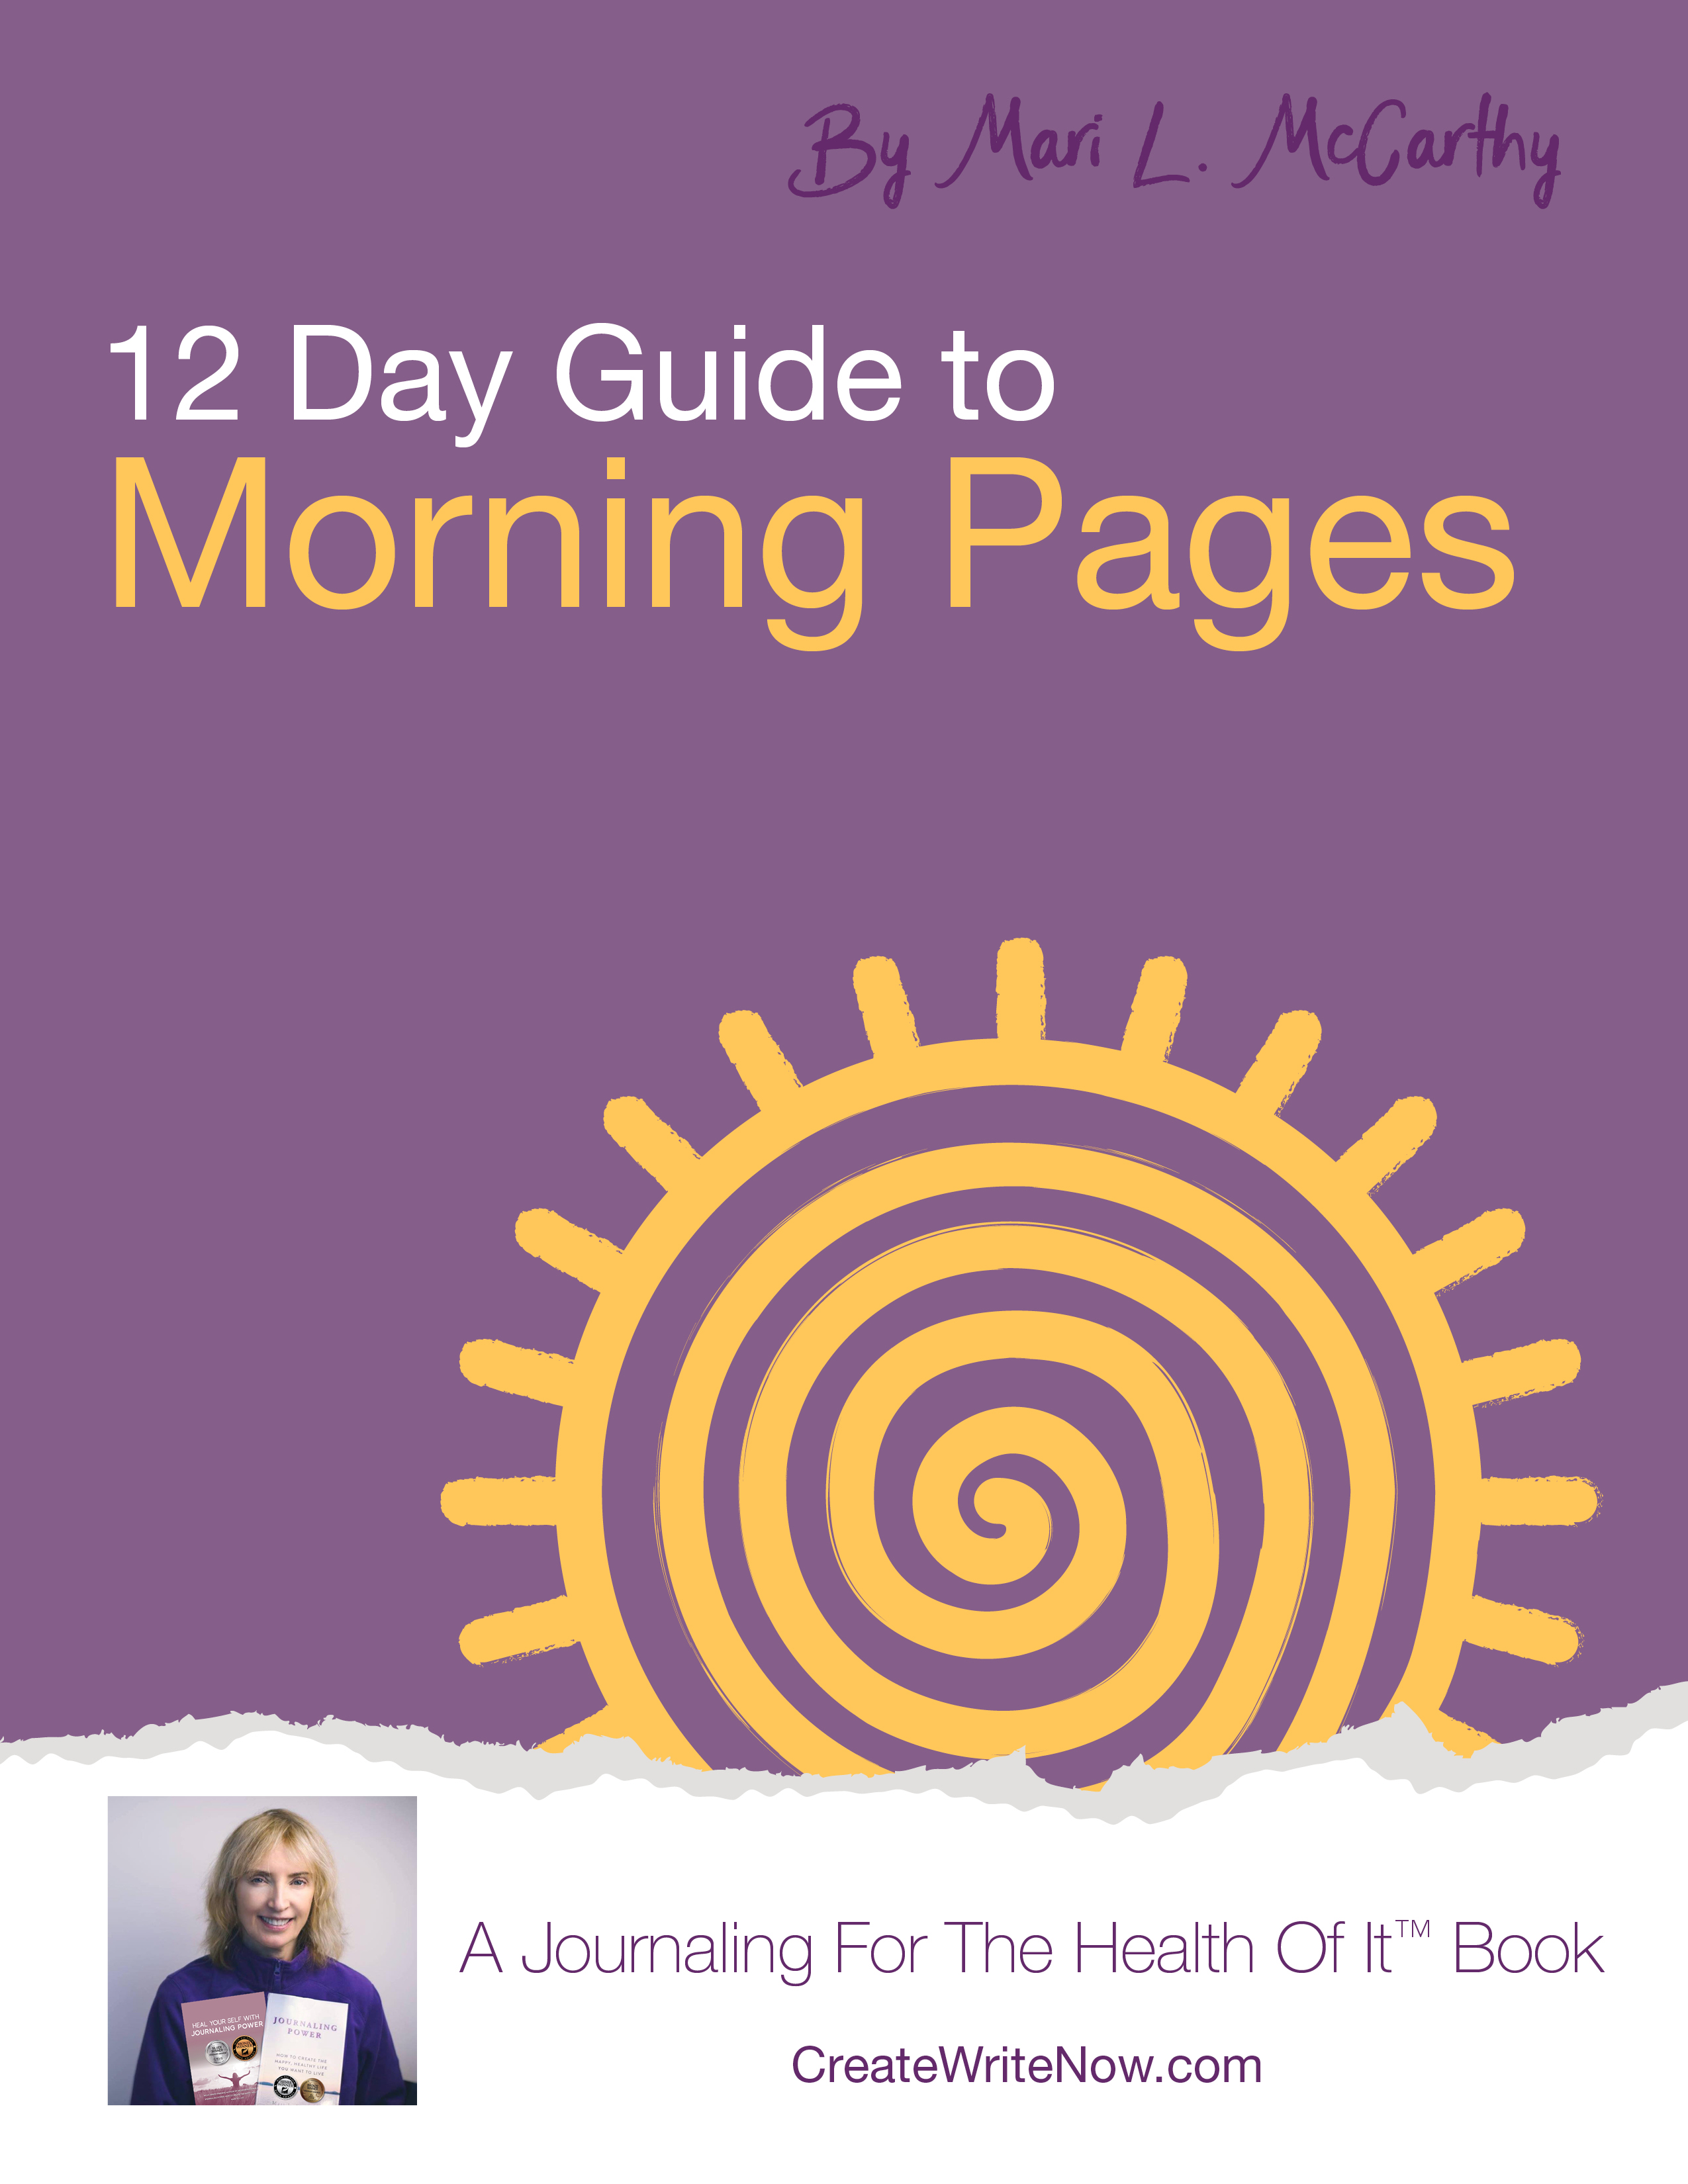 6 Quick Prompts for Writing Morning Pages